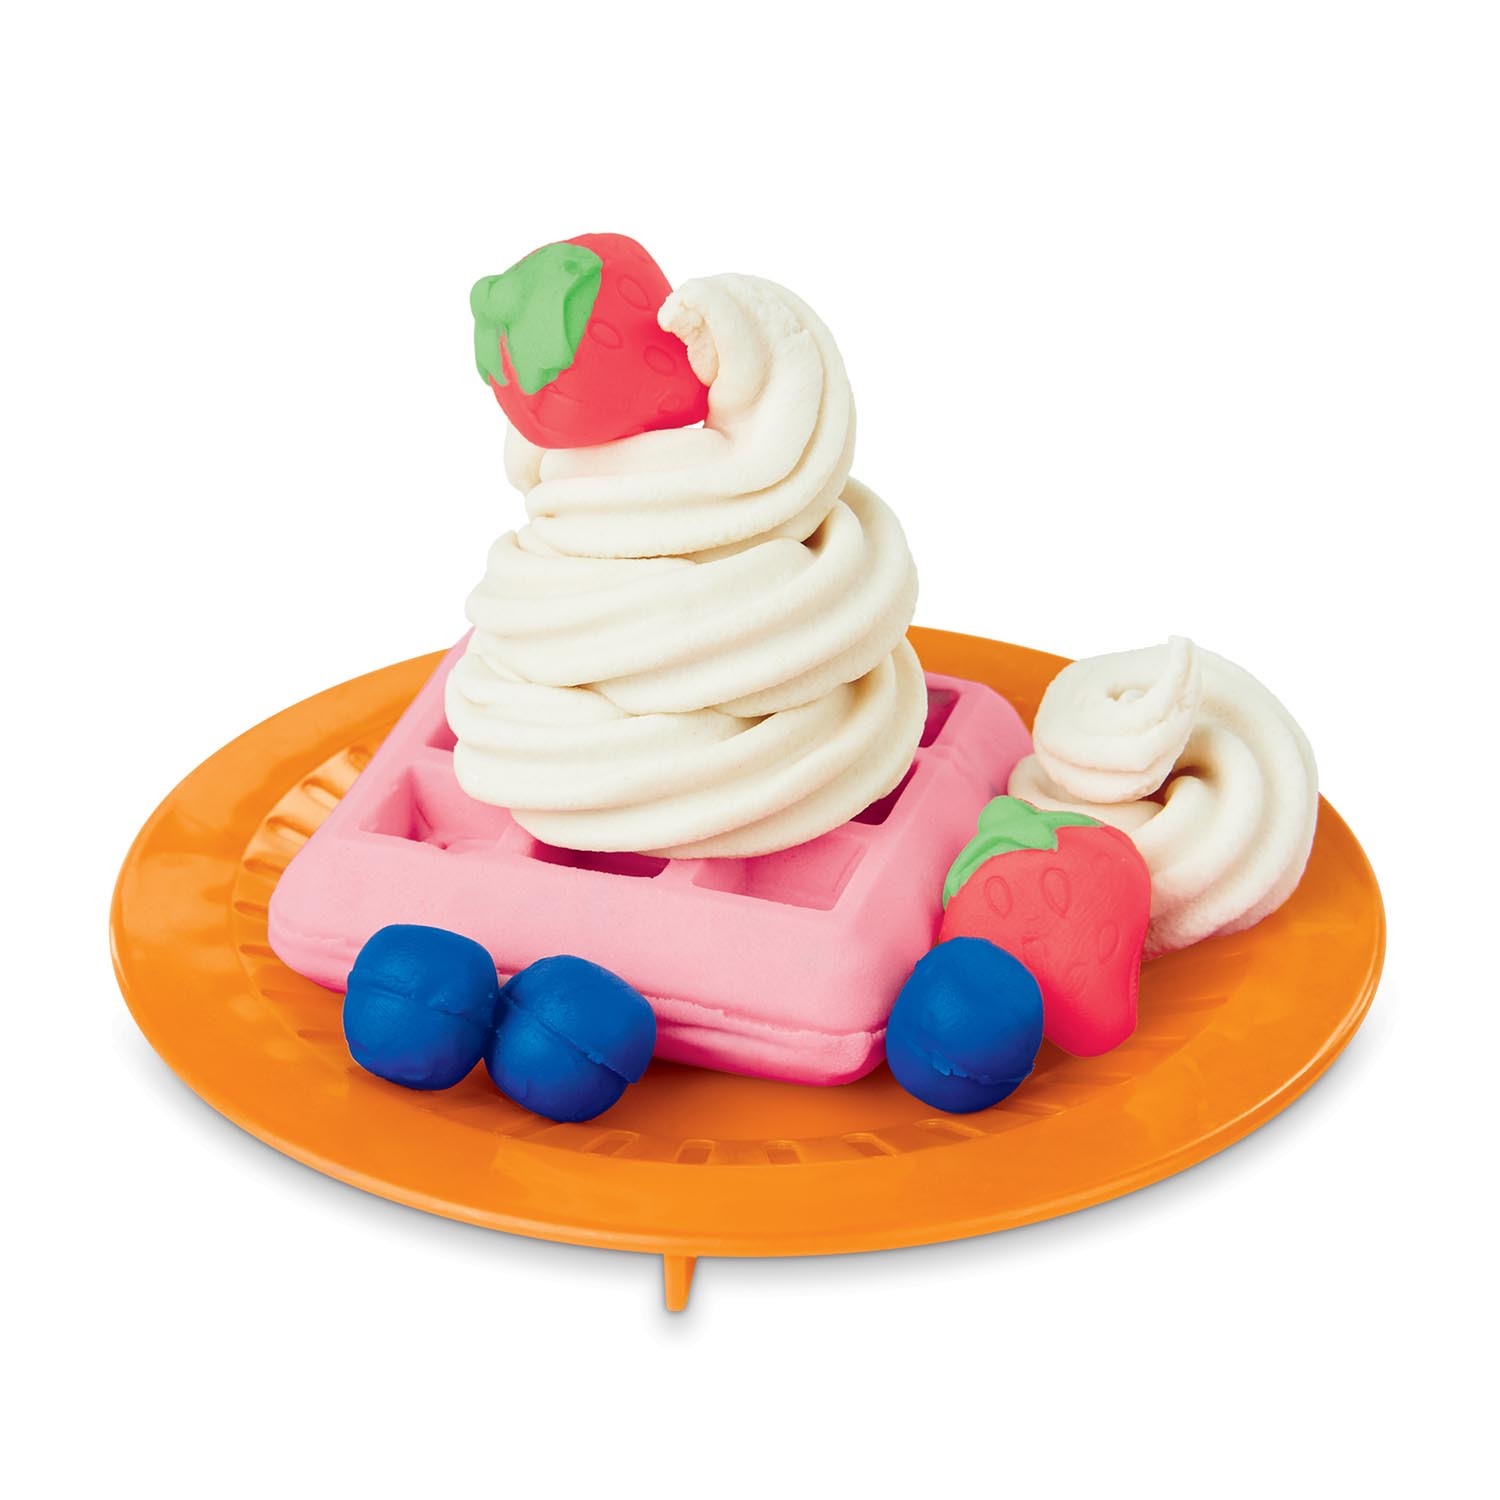 Play-Doh Giftable Playset Image 9